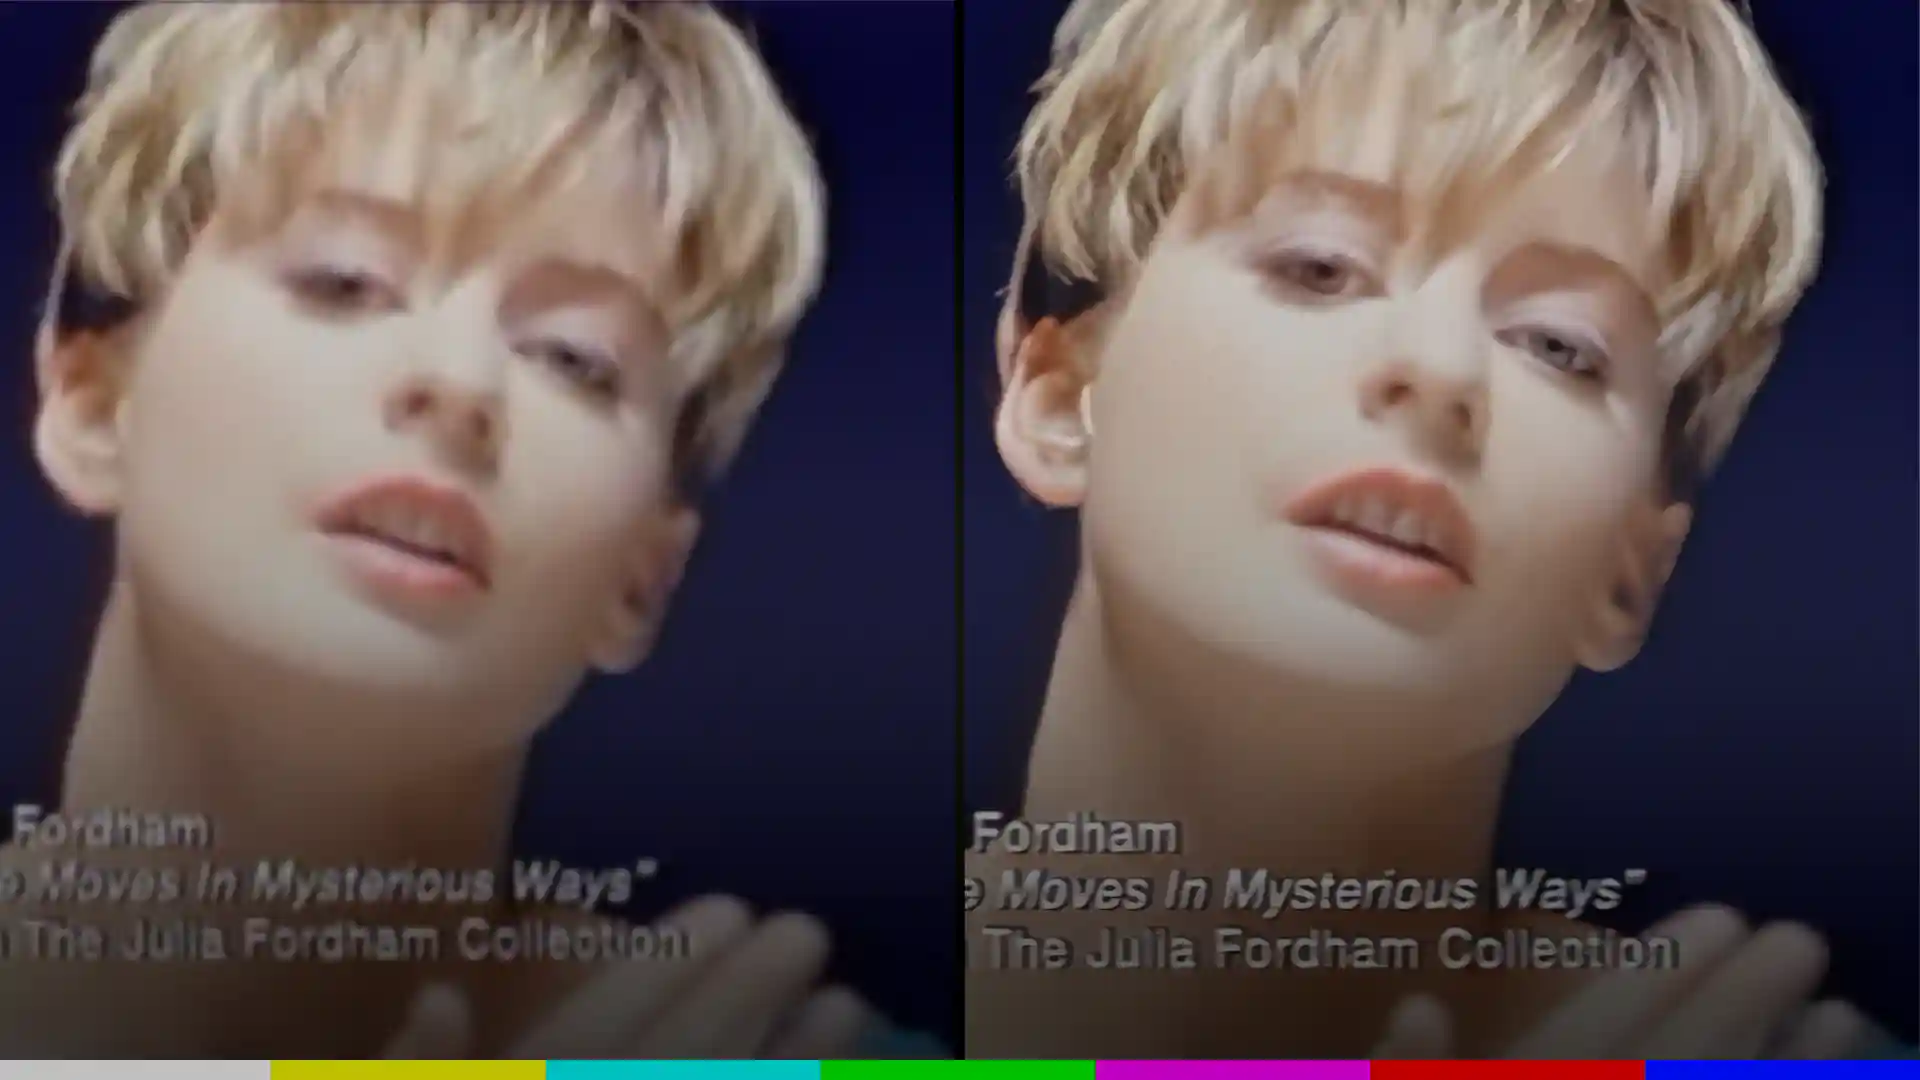 VHS tape of Julia Fordham Upscaled to HD (remastered in 2022)